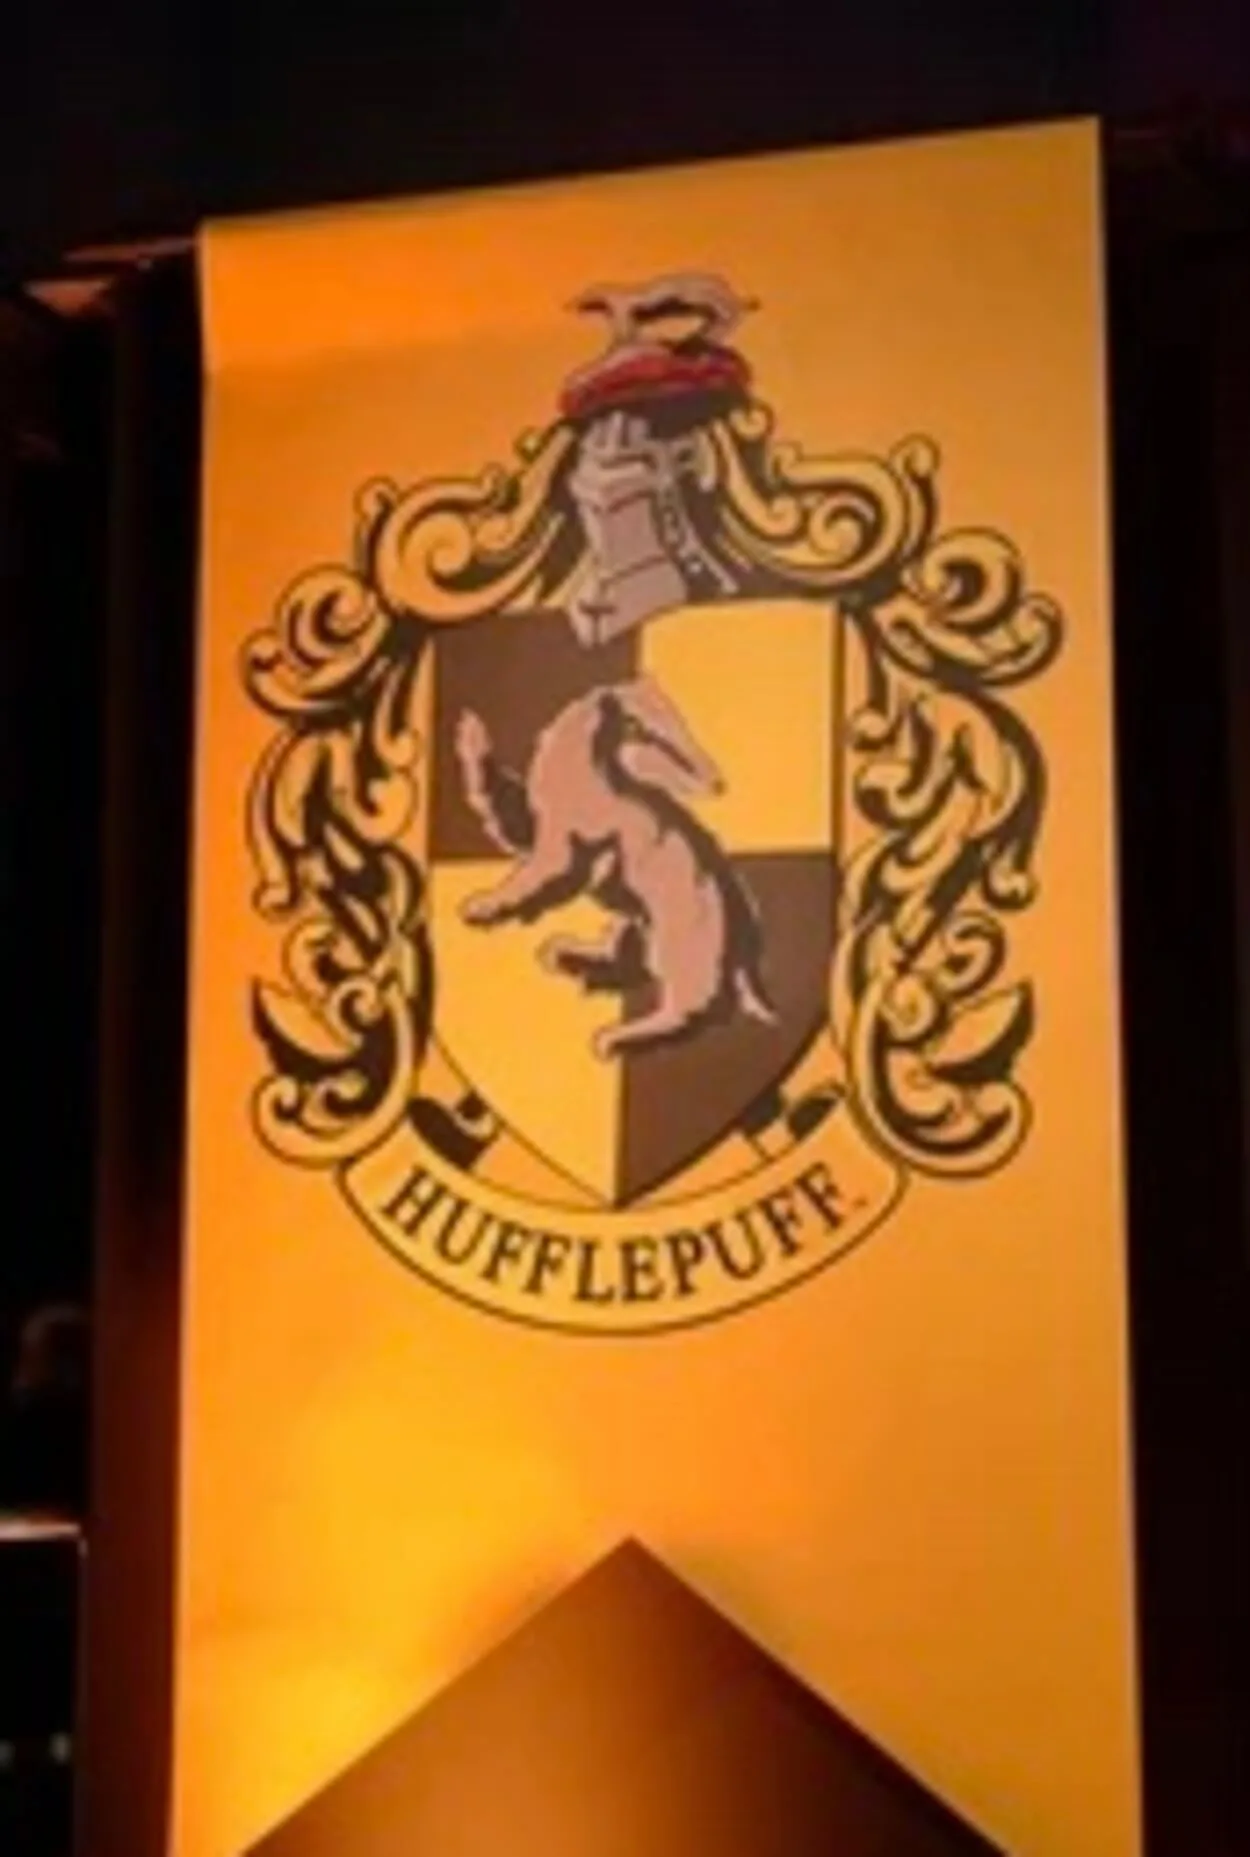 students who are member of hufflepuff are honest and hardworking.